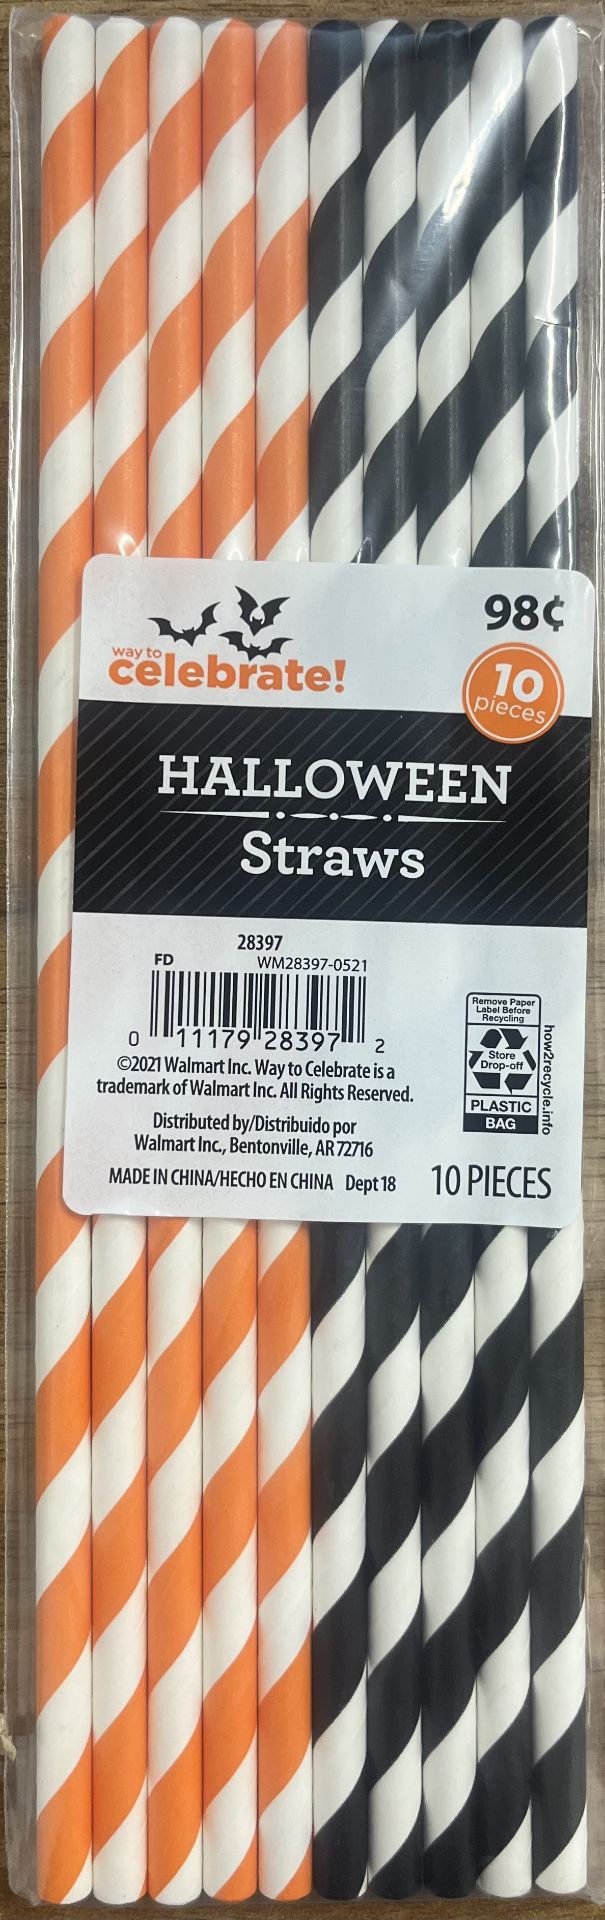 1000 PACKS OF ASSORTED HALLOWEEN PLATES, BOWLS, NAPKINS AND STRAWS, RRP £10,000 - Image 9 of 9